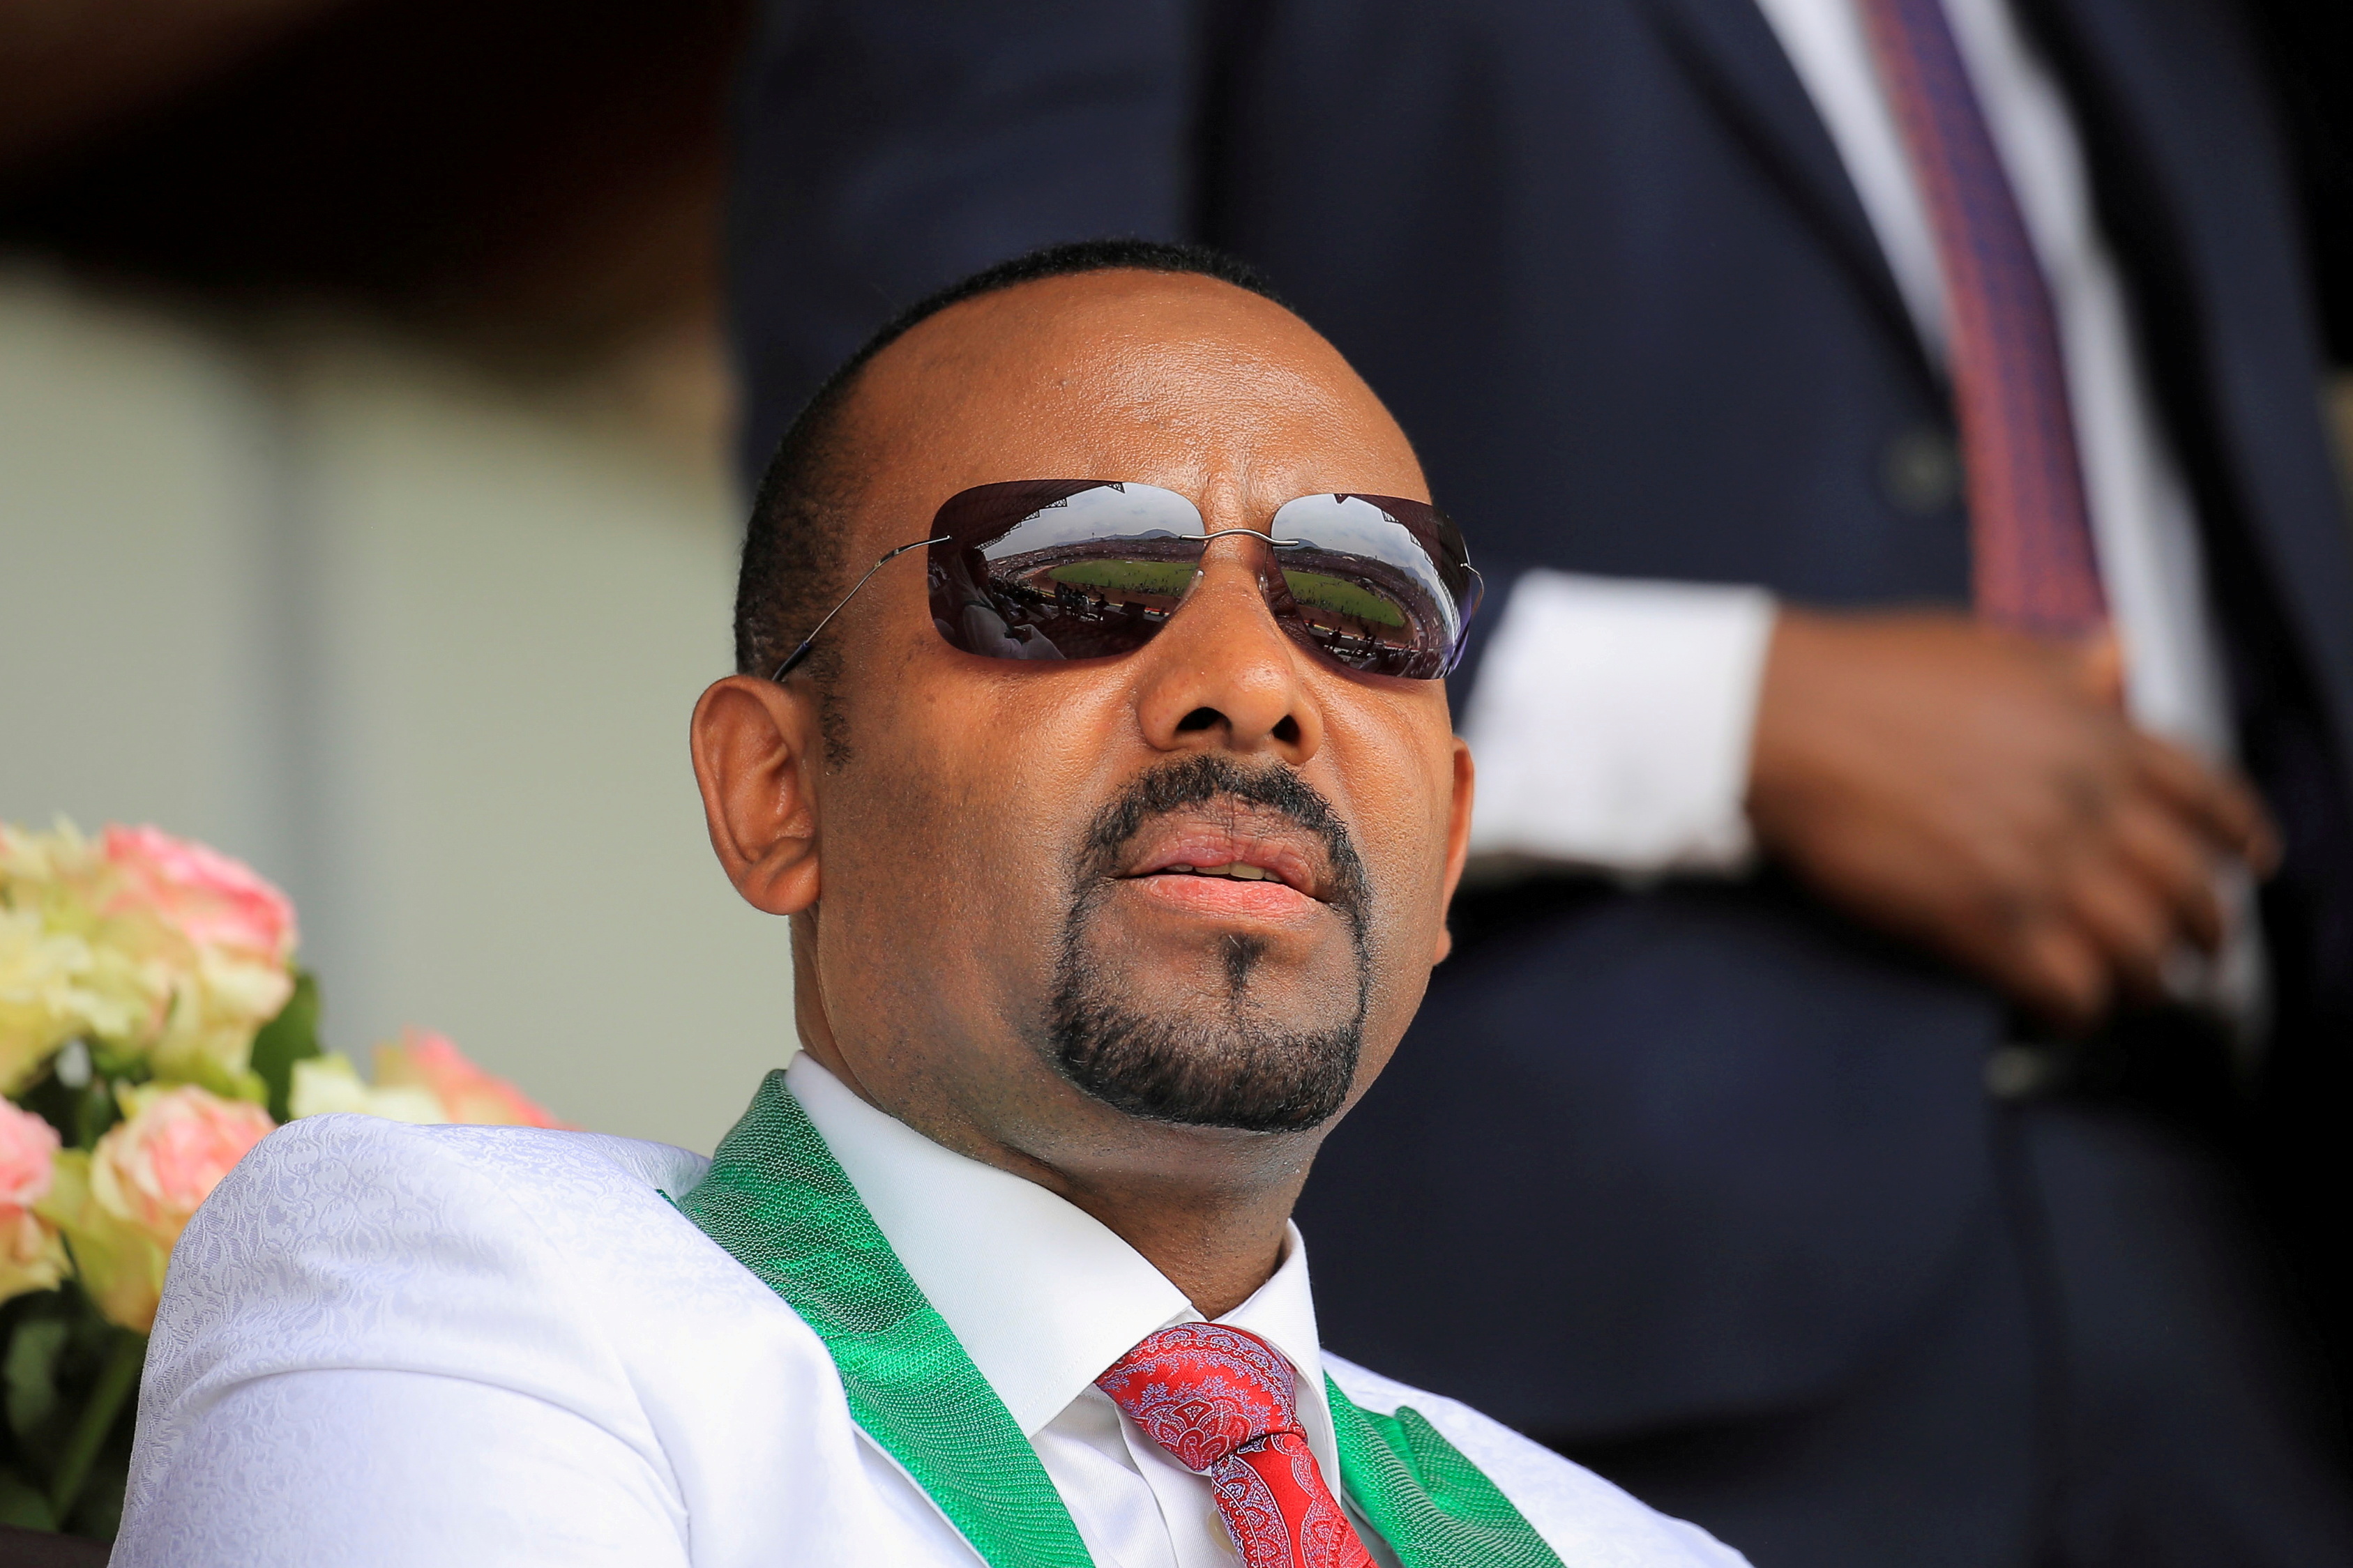   Ethiopian Prime Minister Abiy Ahmed attends his last campaign event ahead of Ethiopia's parliamentary and regional elections scheduled for June 21, in Jimma, Ethiopia, June 16, 2021. REUTERS/Tiksa Negeri/File Photo